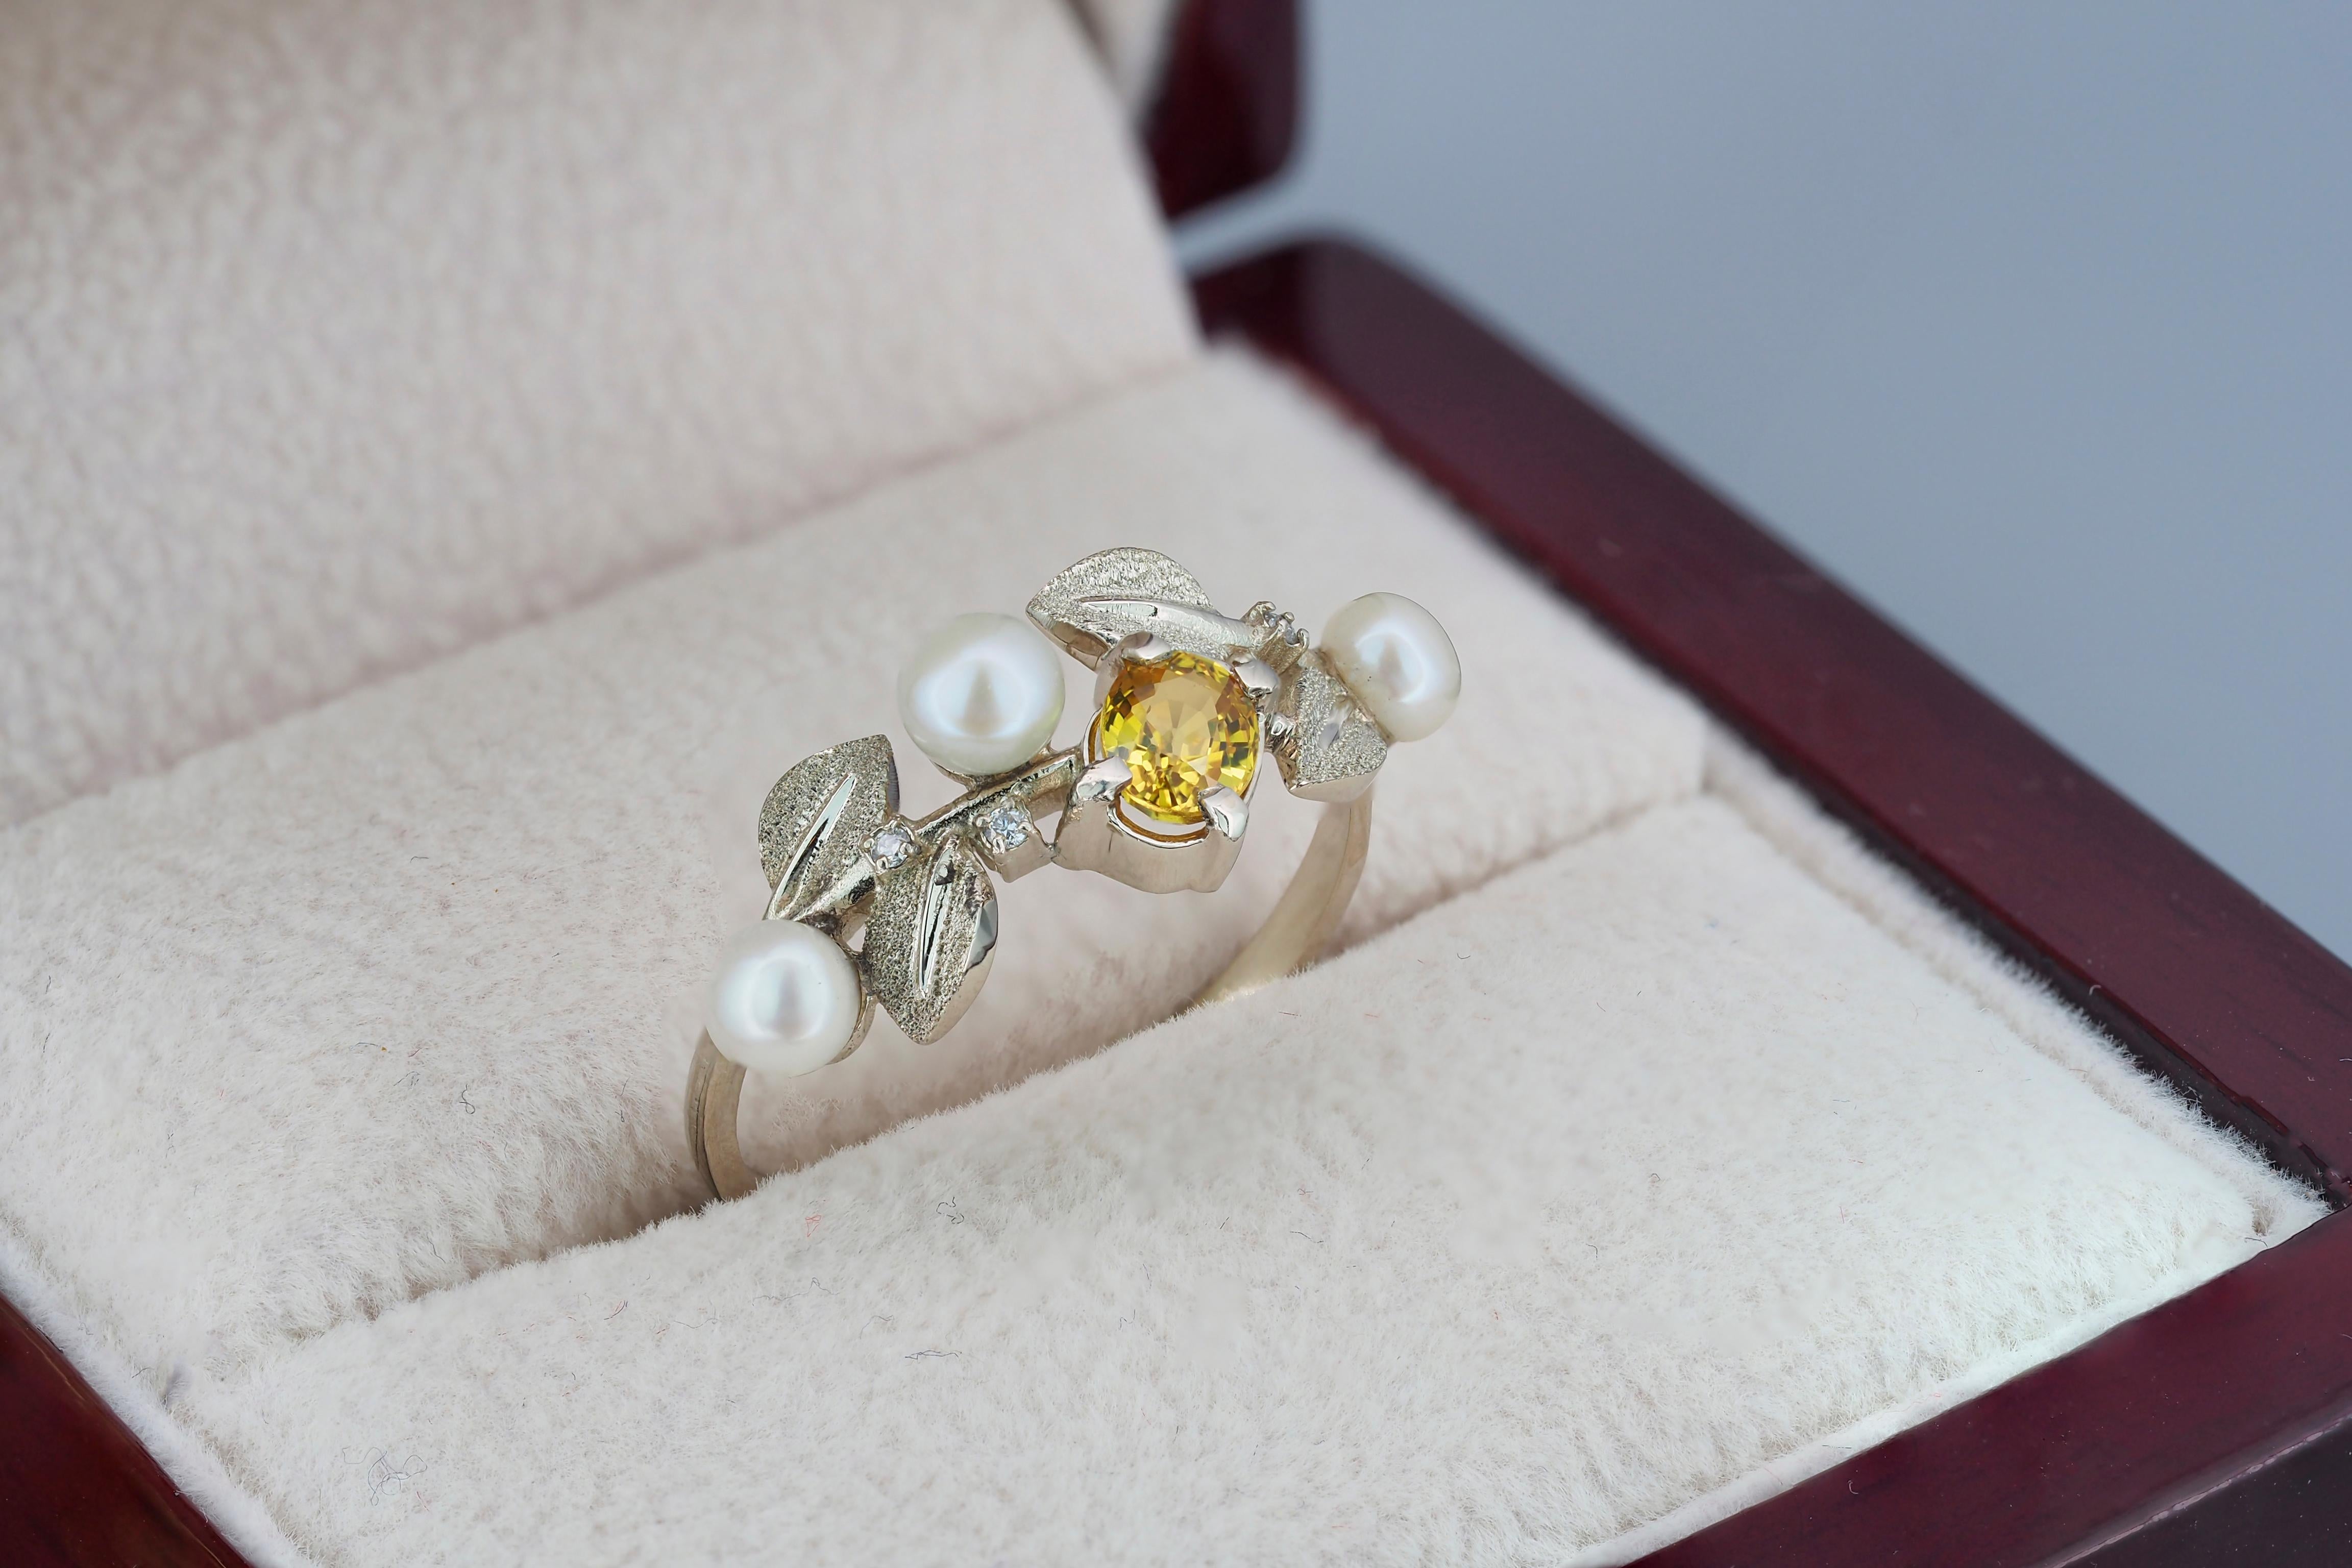 For Sale:  14k Gold Floral Ring with Sapphire, Diamonds and Pearls 6